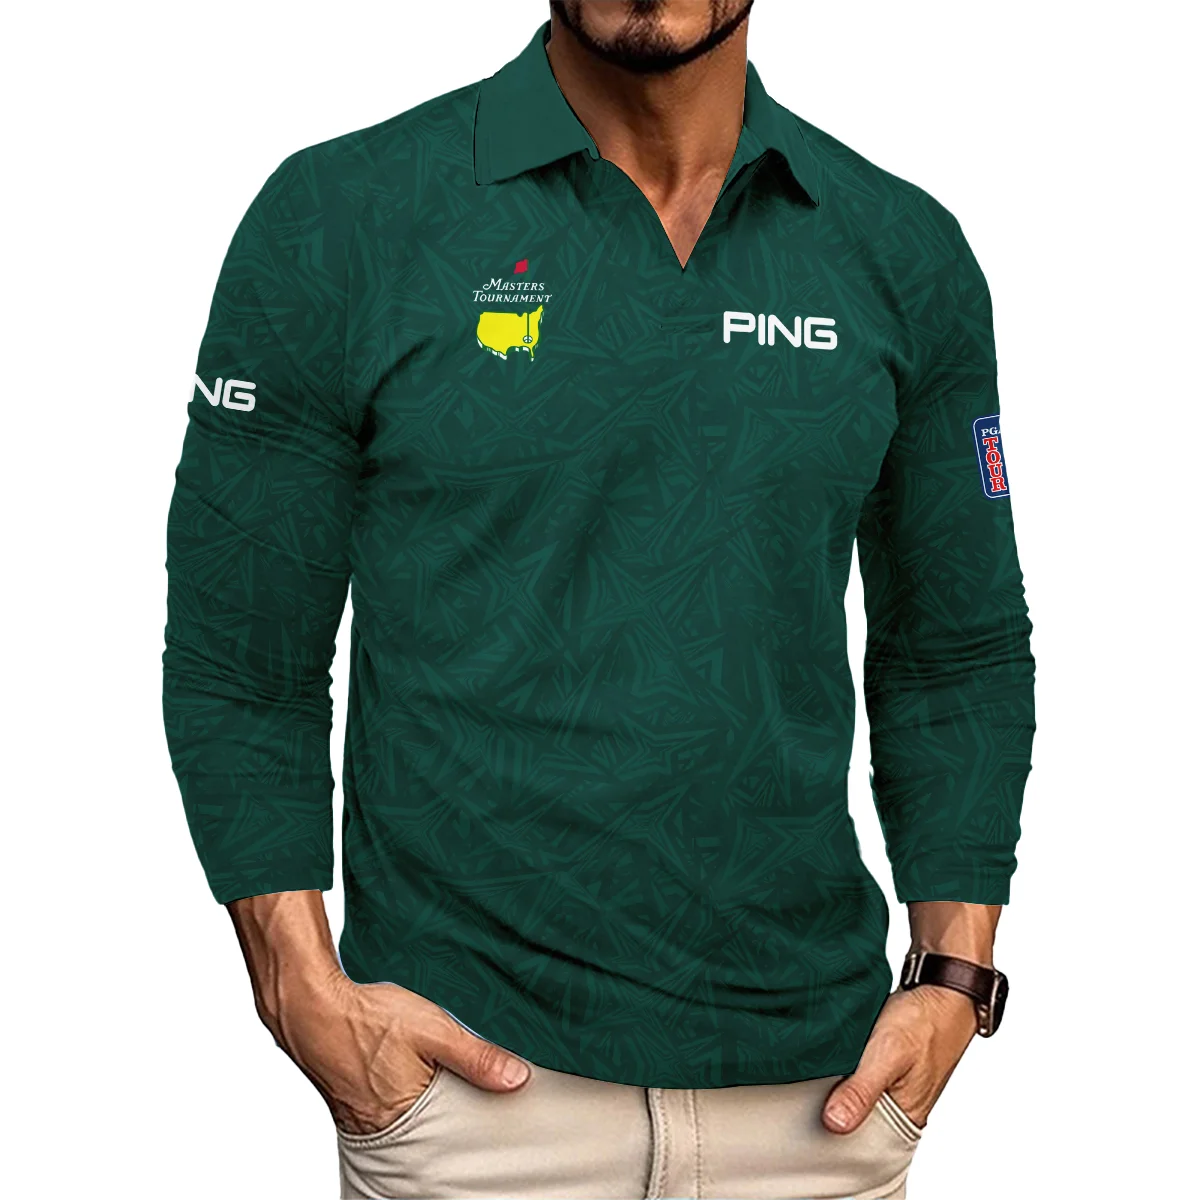 Stars Dark Green Abstract Sport Masters Tournament Ping Long Polo Shirt Style Classic Long Polo Shirt For Men